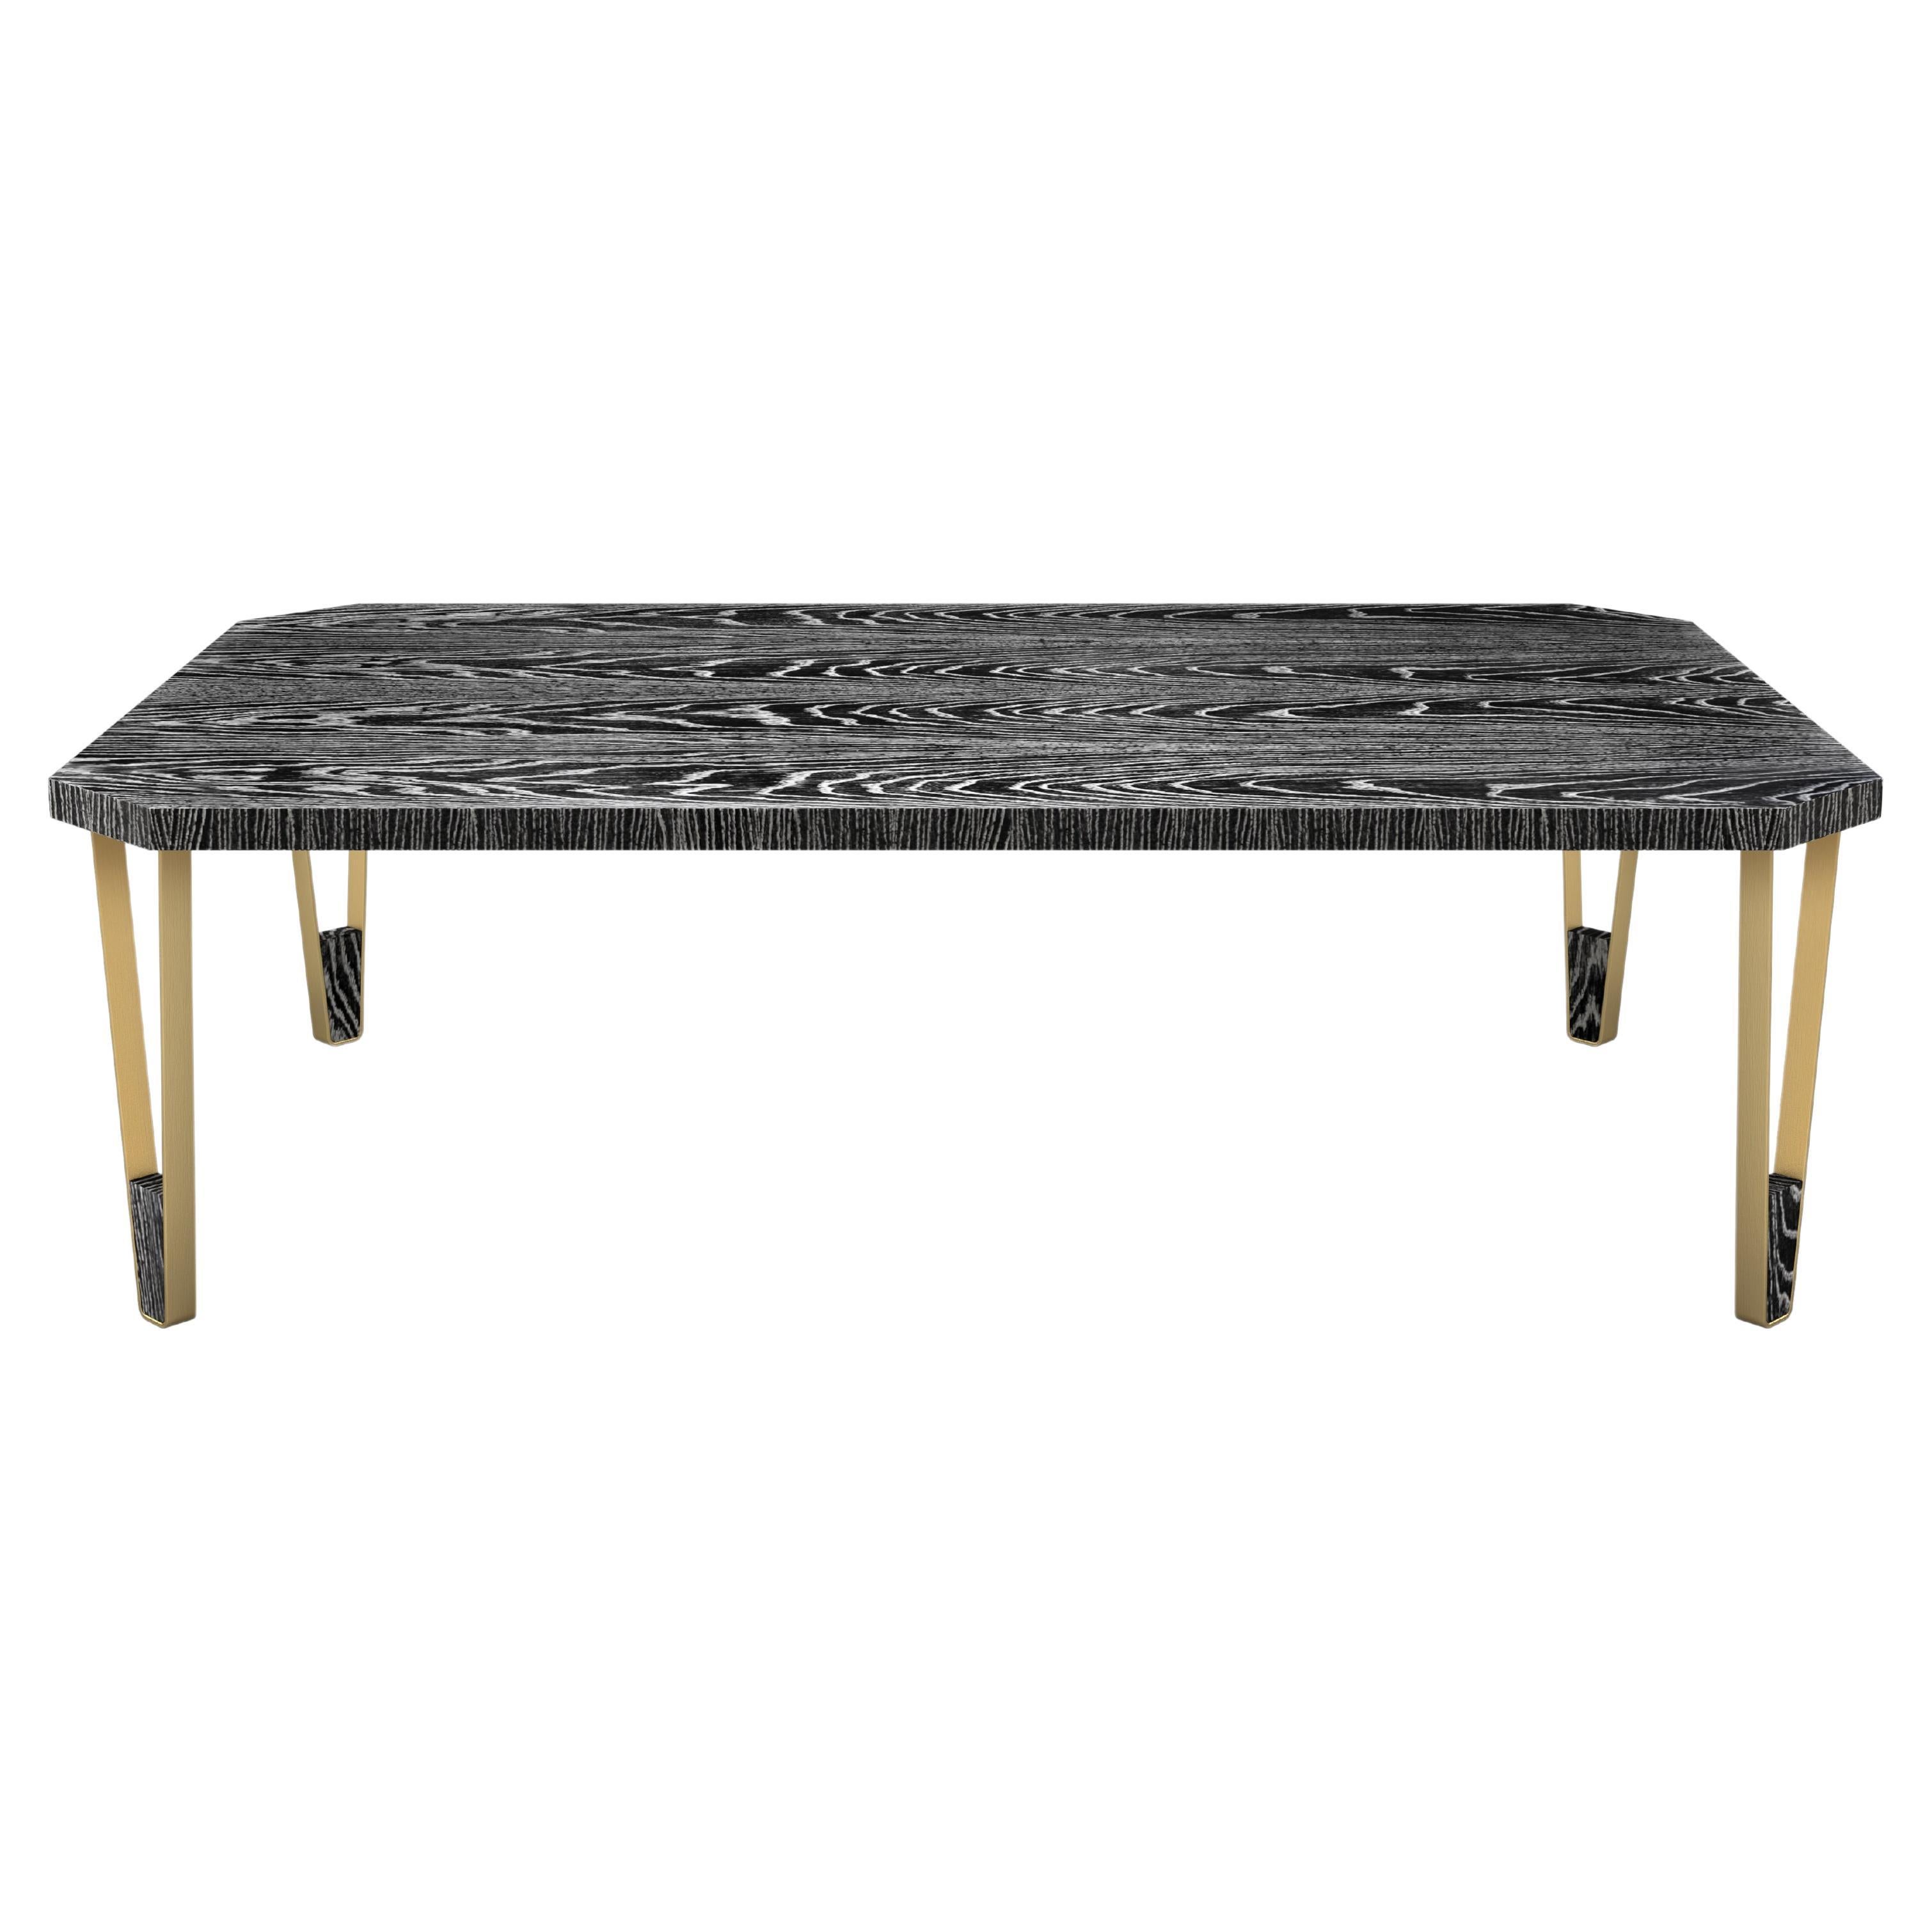 Ionic Rectangular Ebony Limed Oak Coffee Table by InsidherLand For Sale